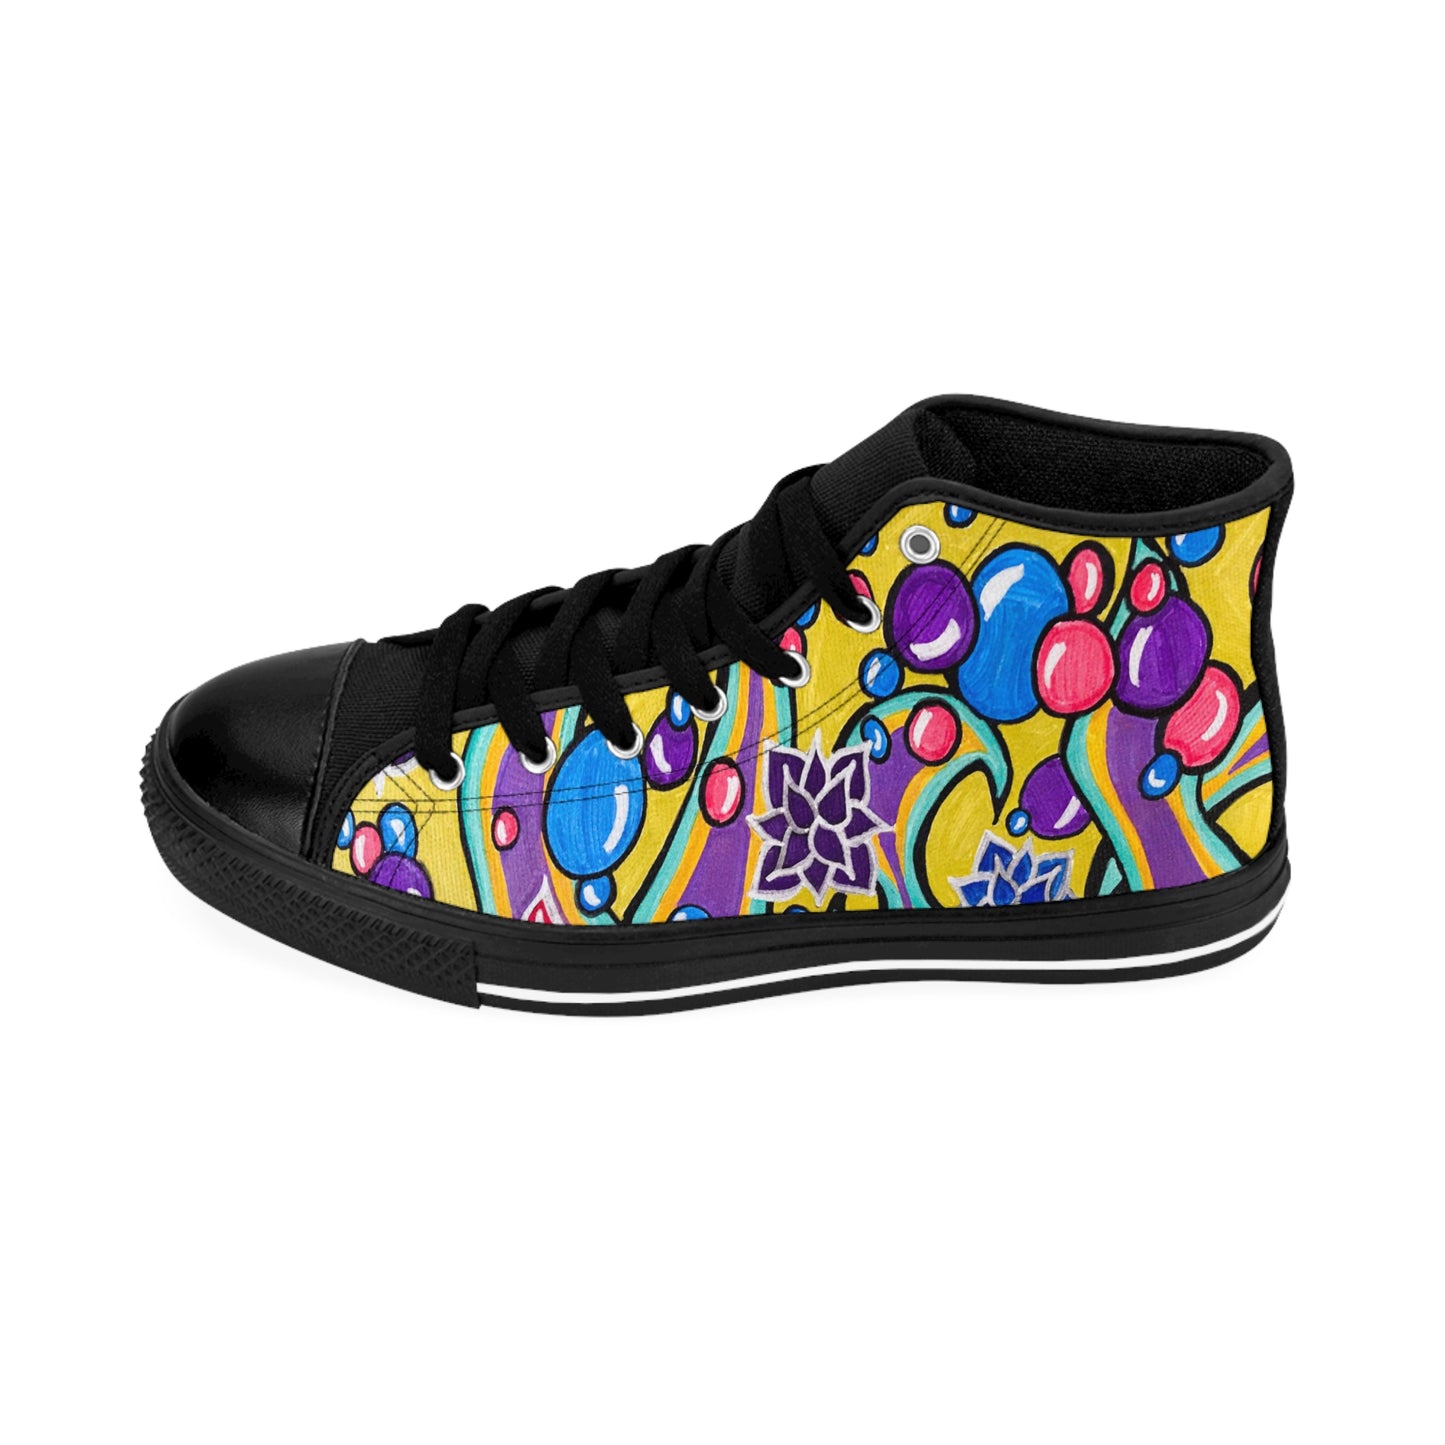 Women's - Under the Sea - High-top Sneakers